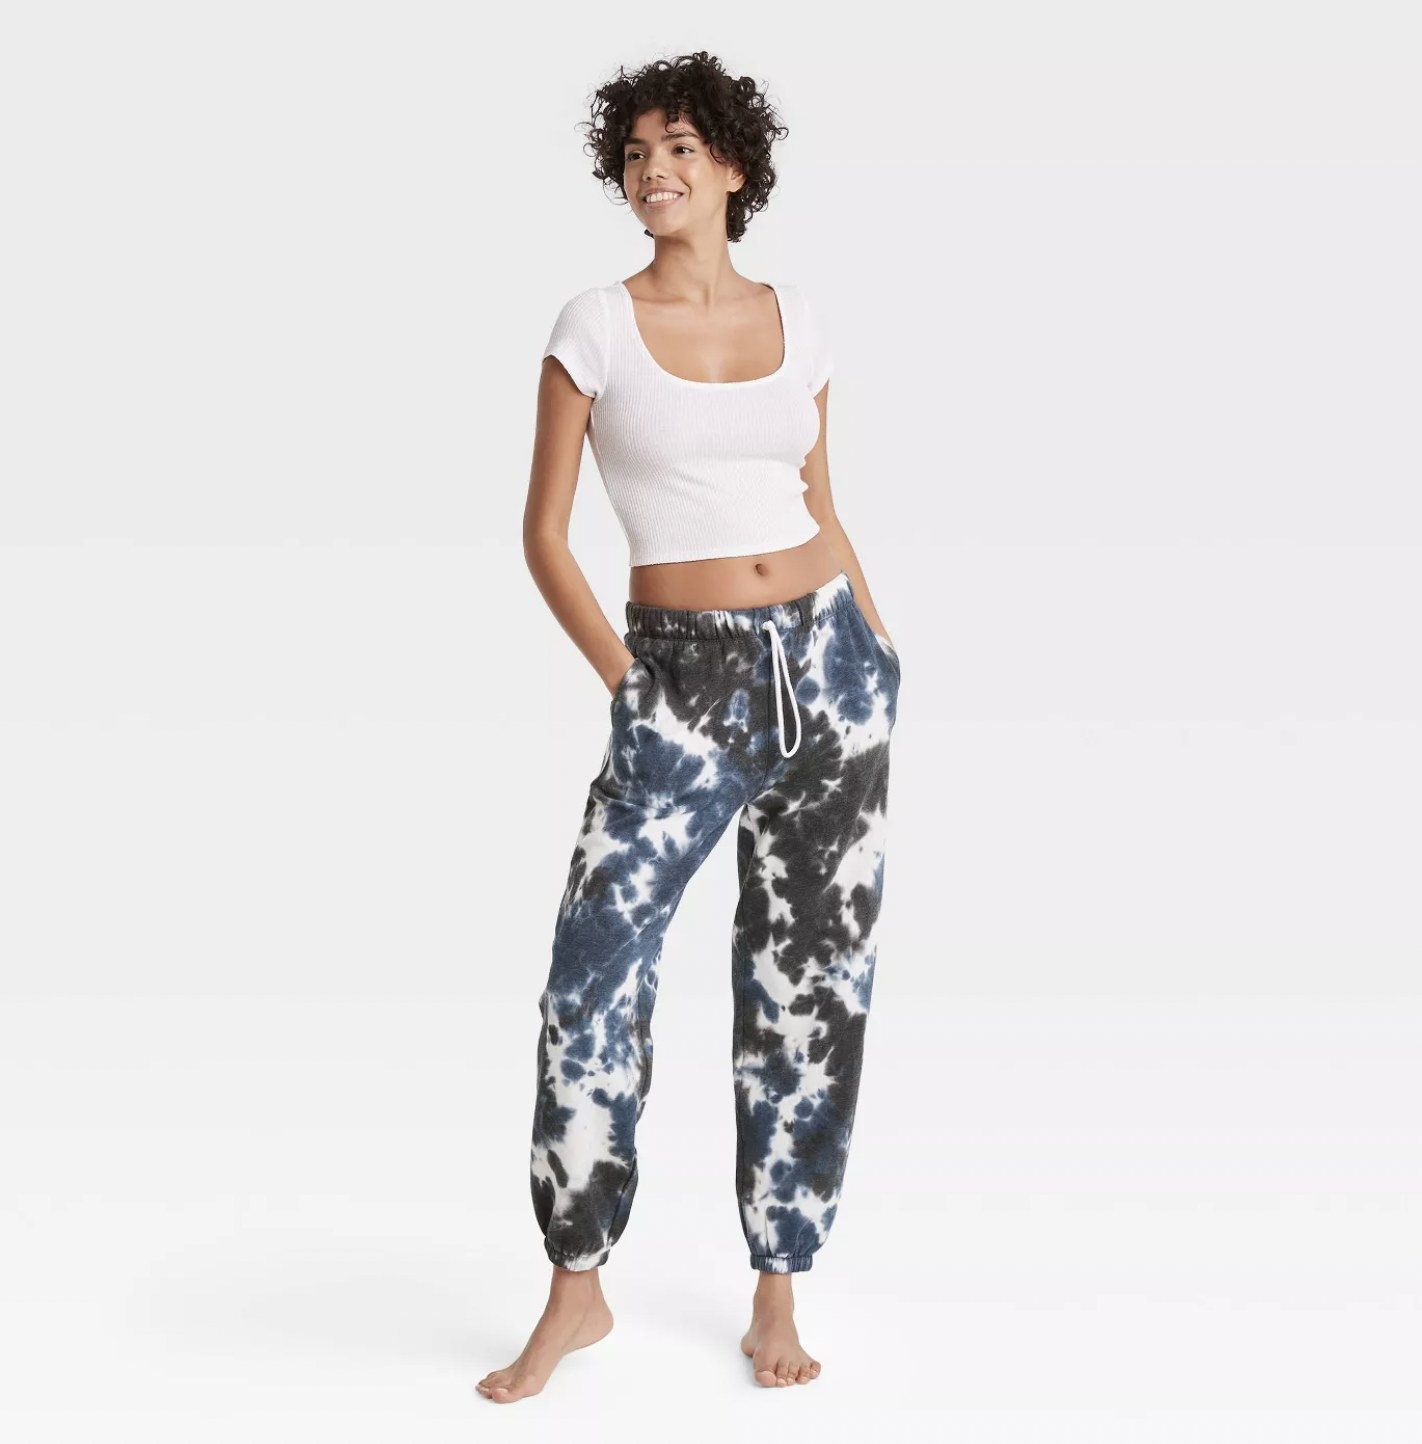 Model wearing the blue and white tie-dye joggers with fold-over elastic waist